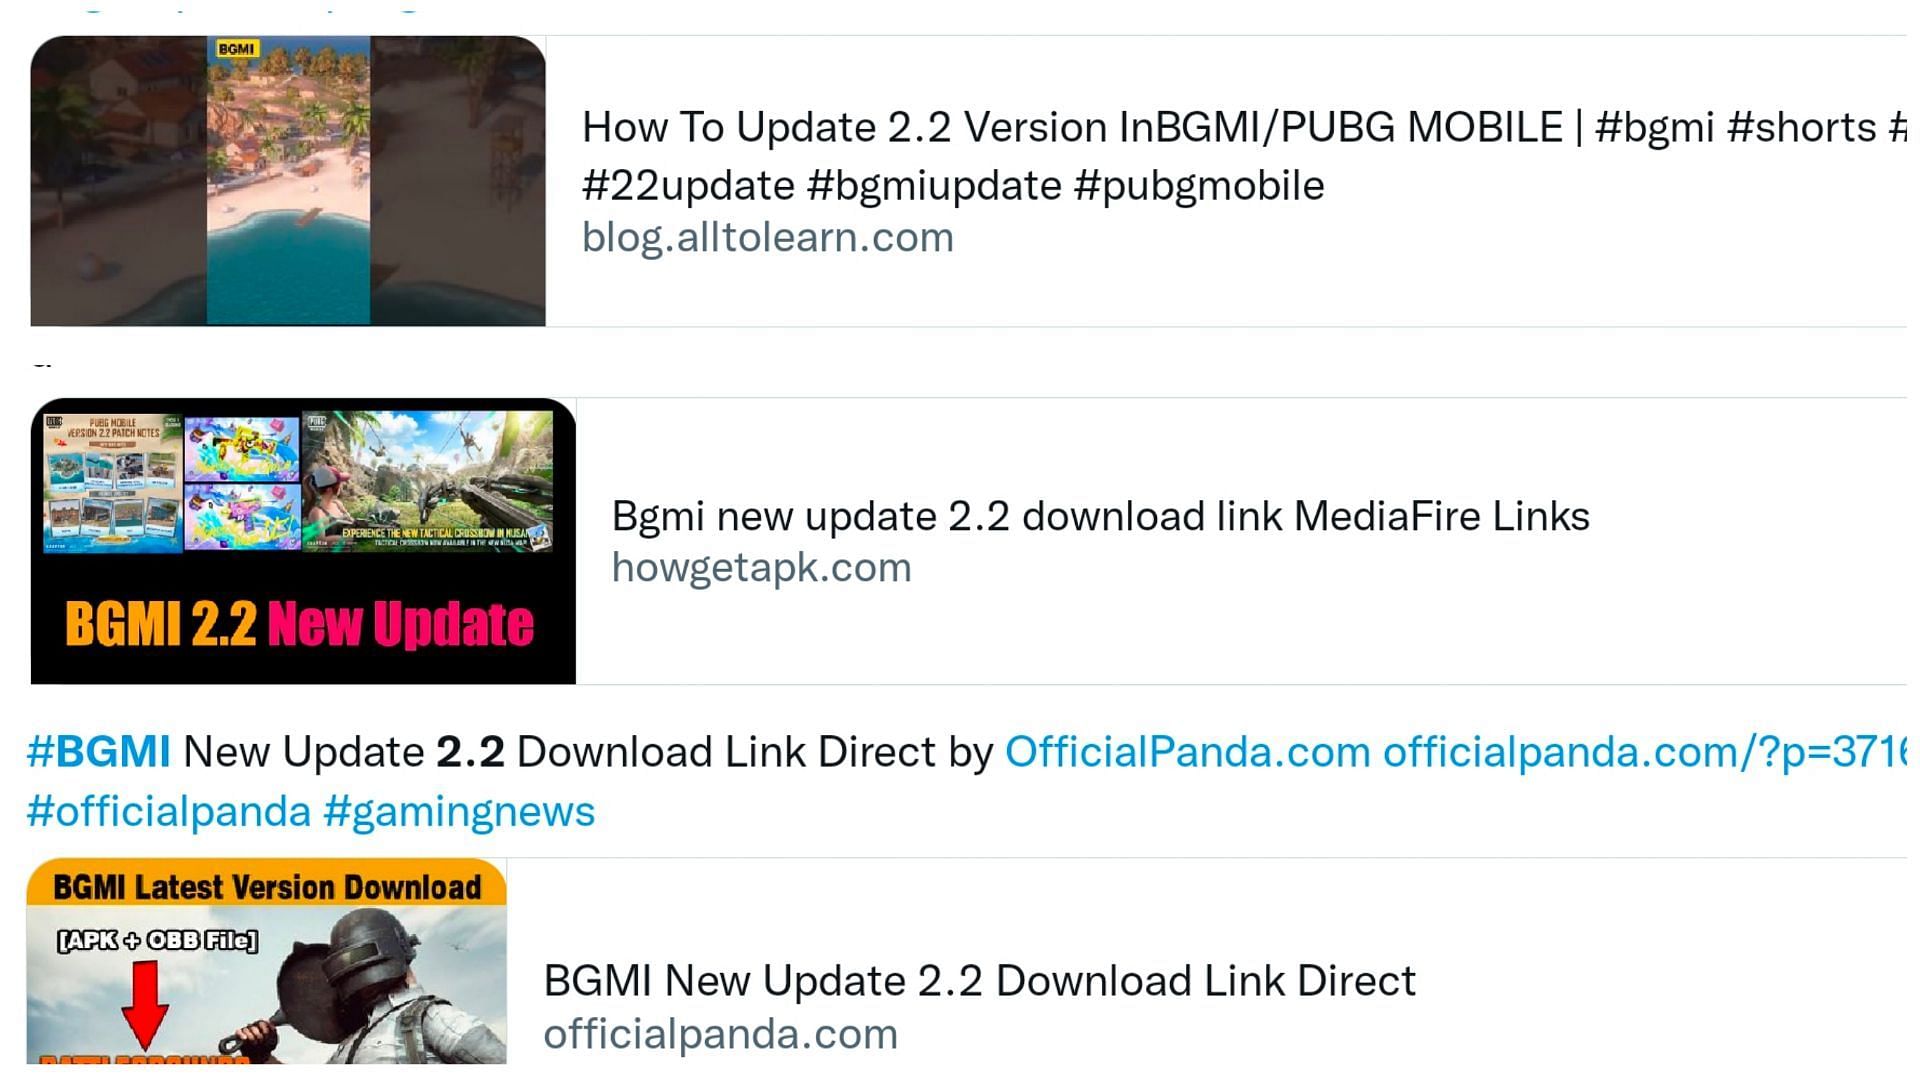 One can spot multiple tweets featuring download links for the Battlegrounds Mobile India 2.2 version (Image via Twitter)